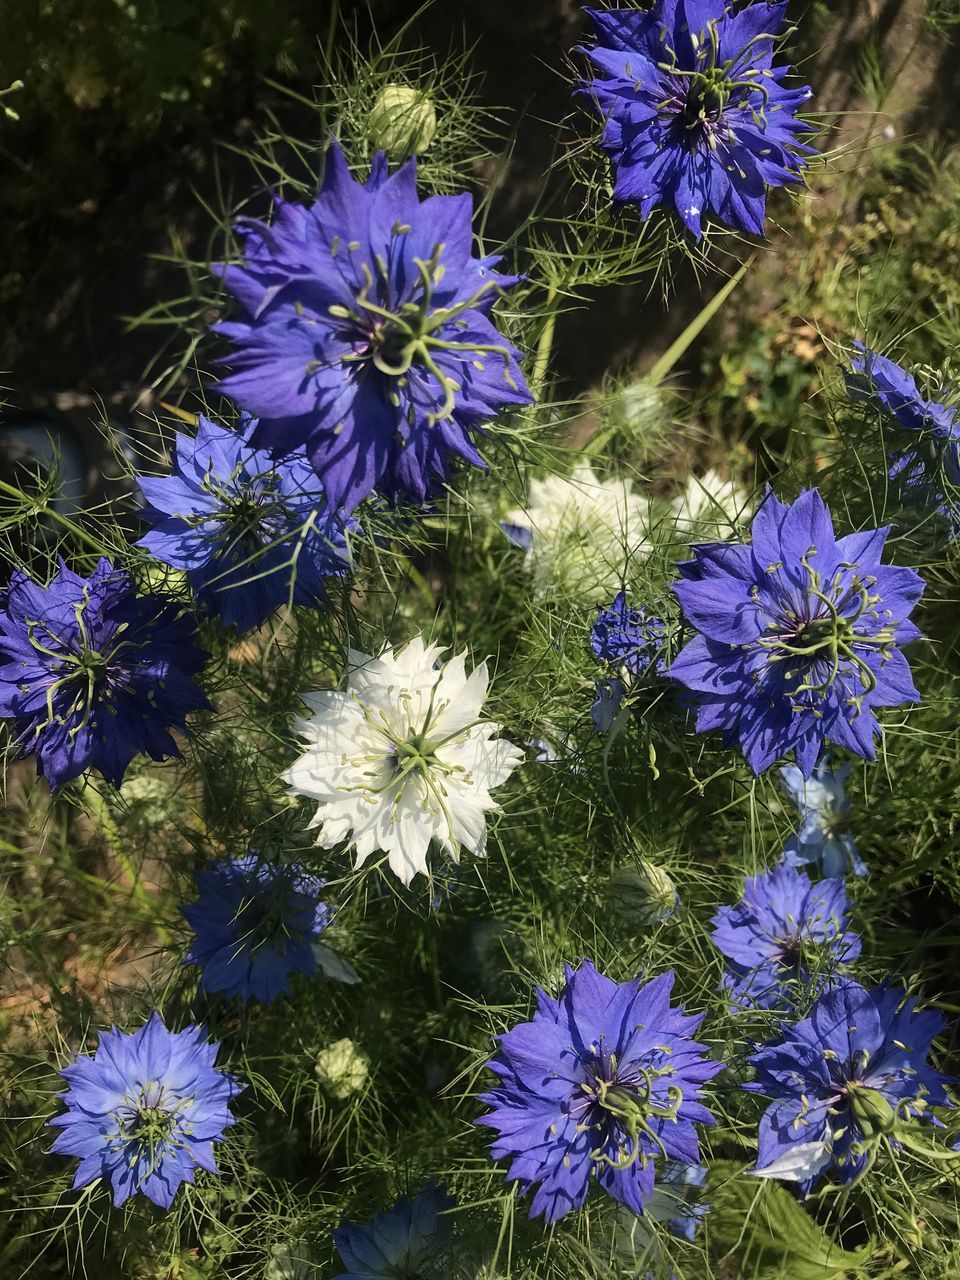 flowering plant, flower, plant, beauty in nature, freshness, aster, growth, fragility, purple, nature, petal, high angle view, inflorescence, close-up, no people, flower head, day, chicory, blue, outdoors, botany, wildflower, land, sunlight